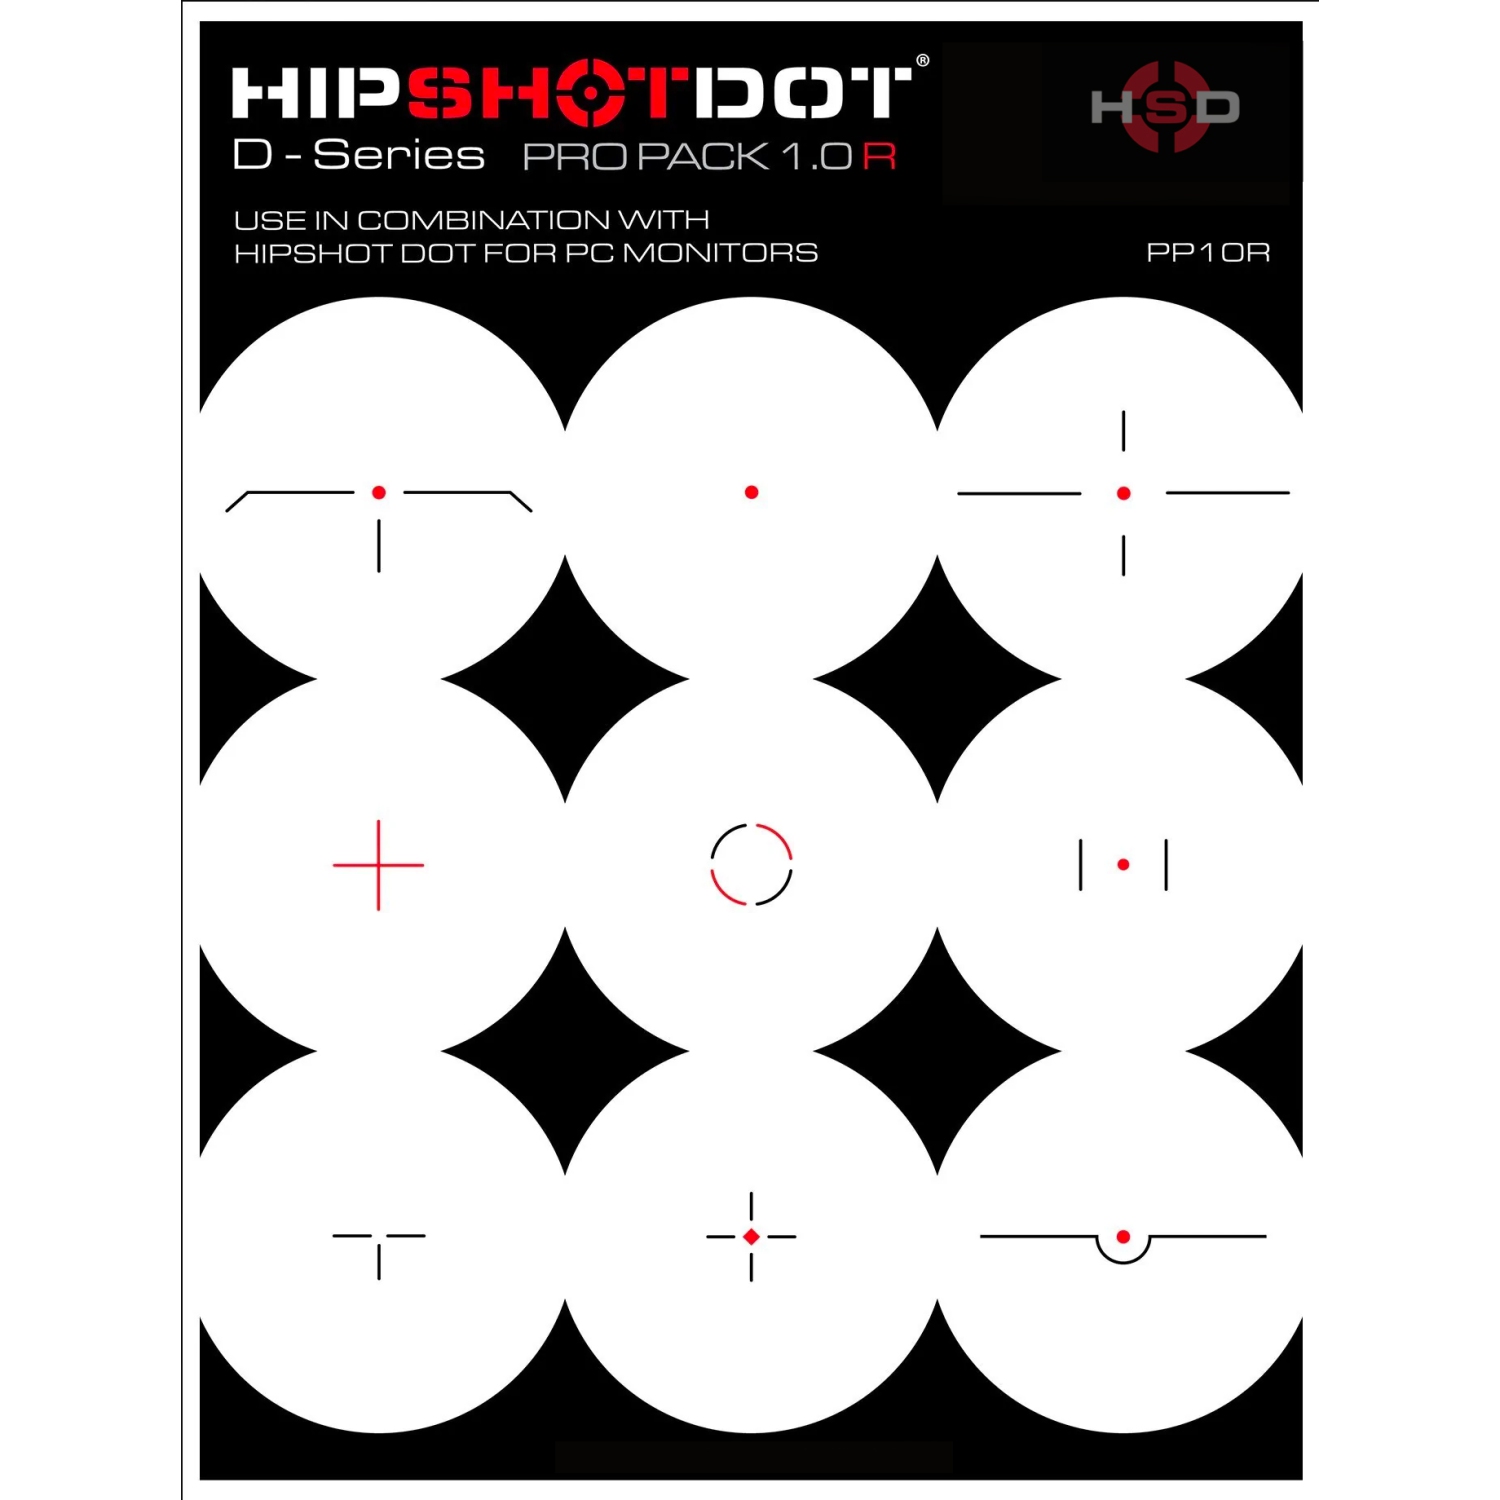 HipShotDot D-Series Tech Pack - Reusable Transparent Aim Sight Assist TV Decals - Gaming Television or Monitor Decal for FPS Video Games Compatible with PC, Xbox & Playstation (PP 1.0, Red)